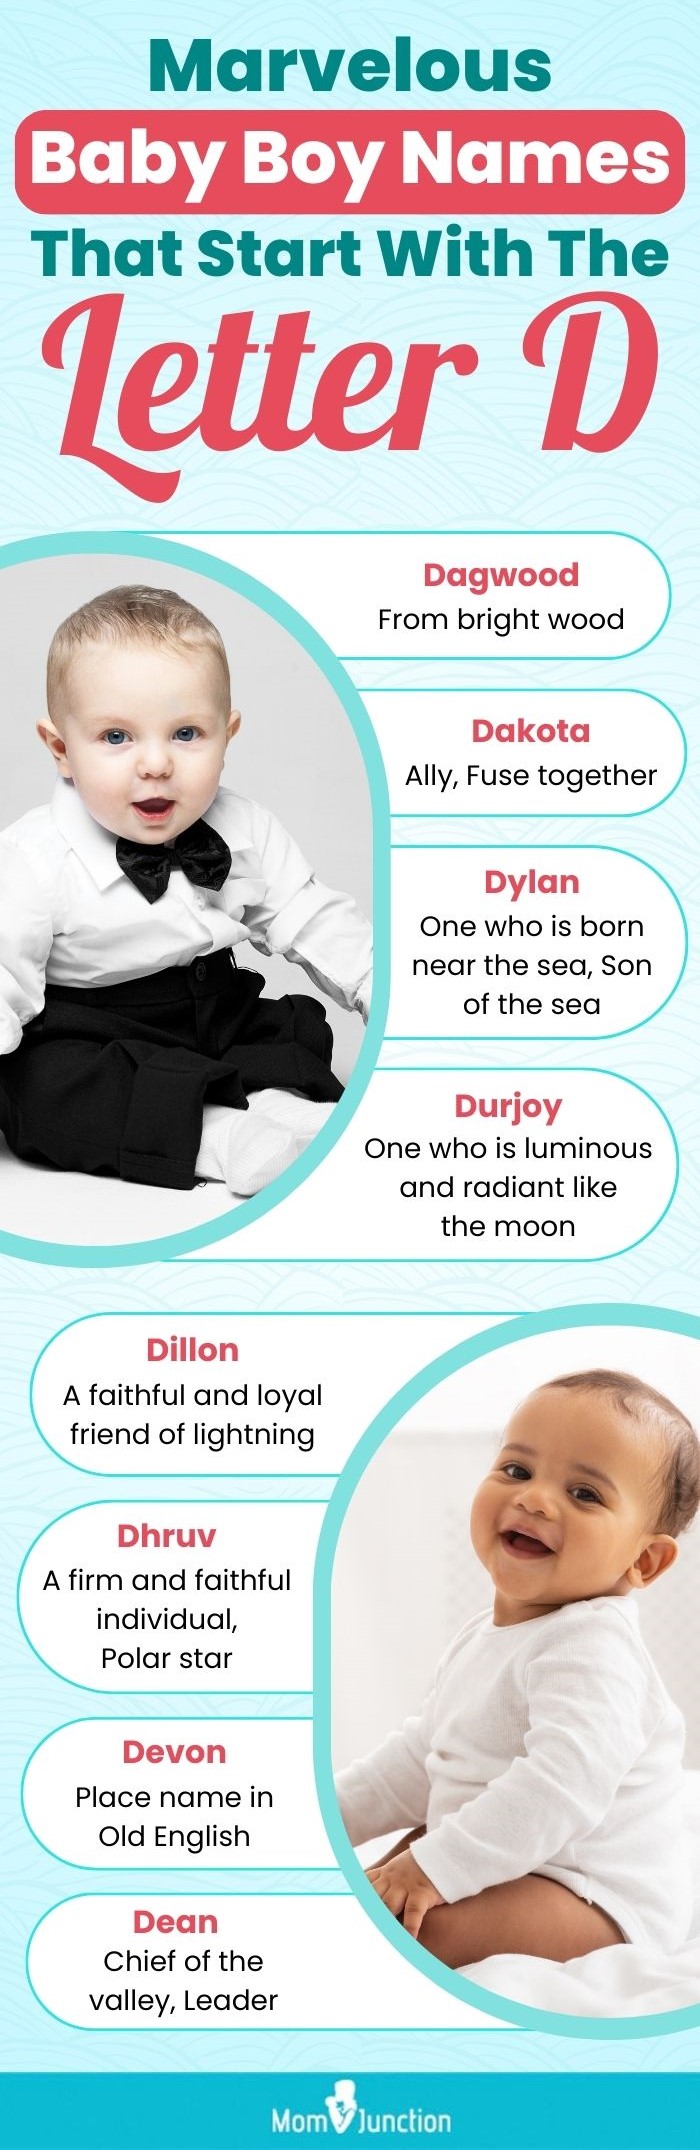 marvelous baby boy names that start with the letter d(infographic)